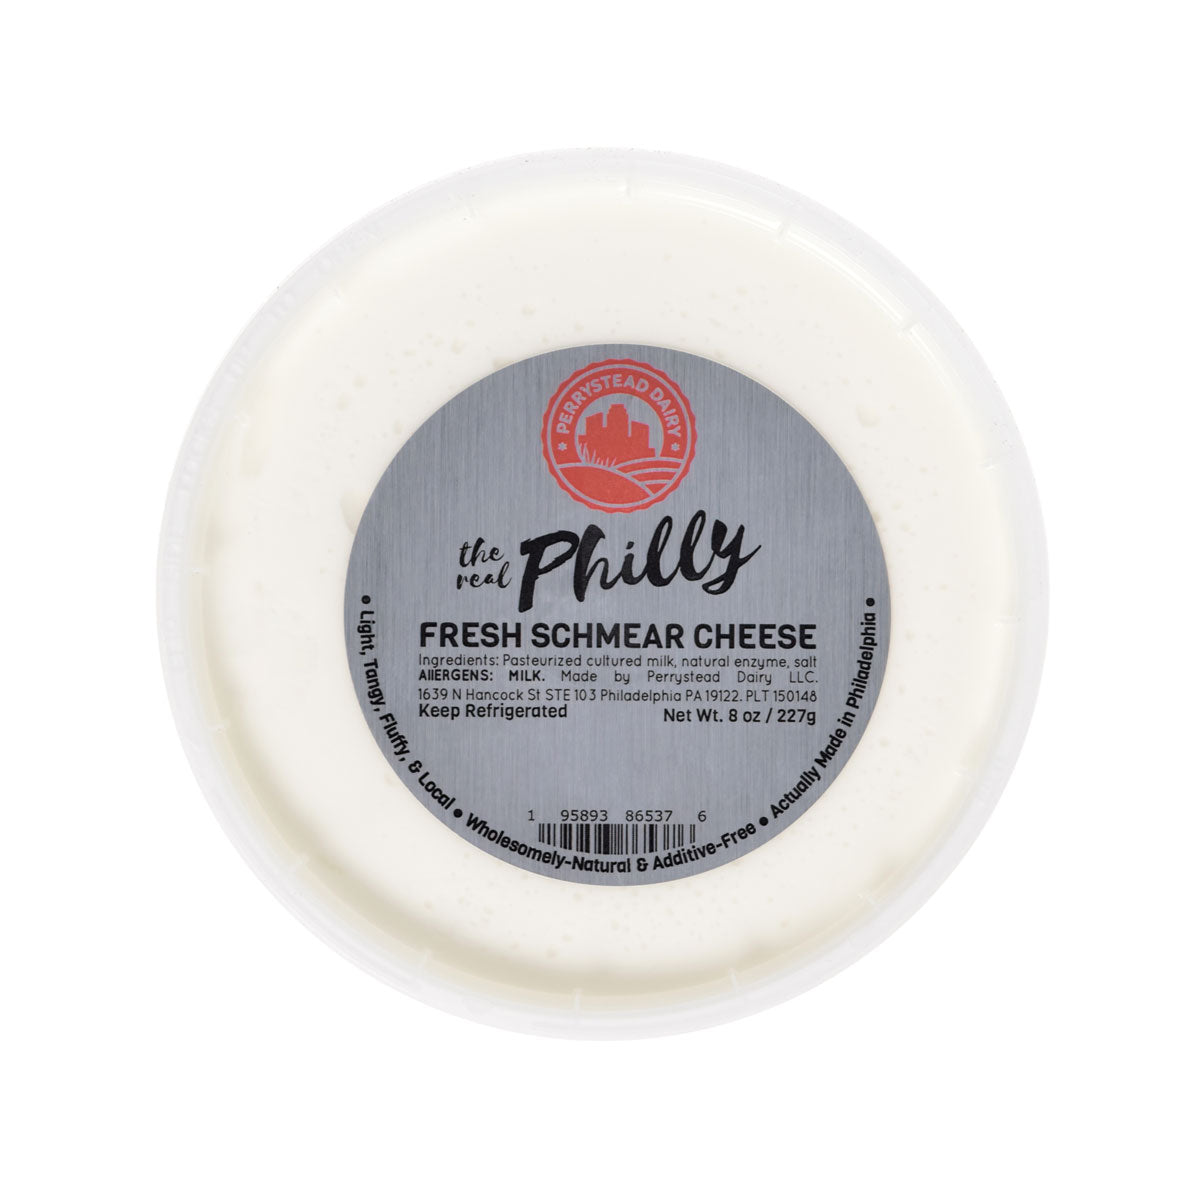 Perrystead The Real Philly Schmear Cheese 7oz 6ct